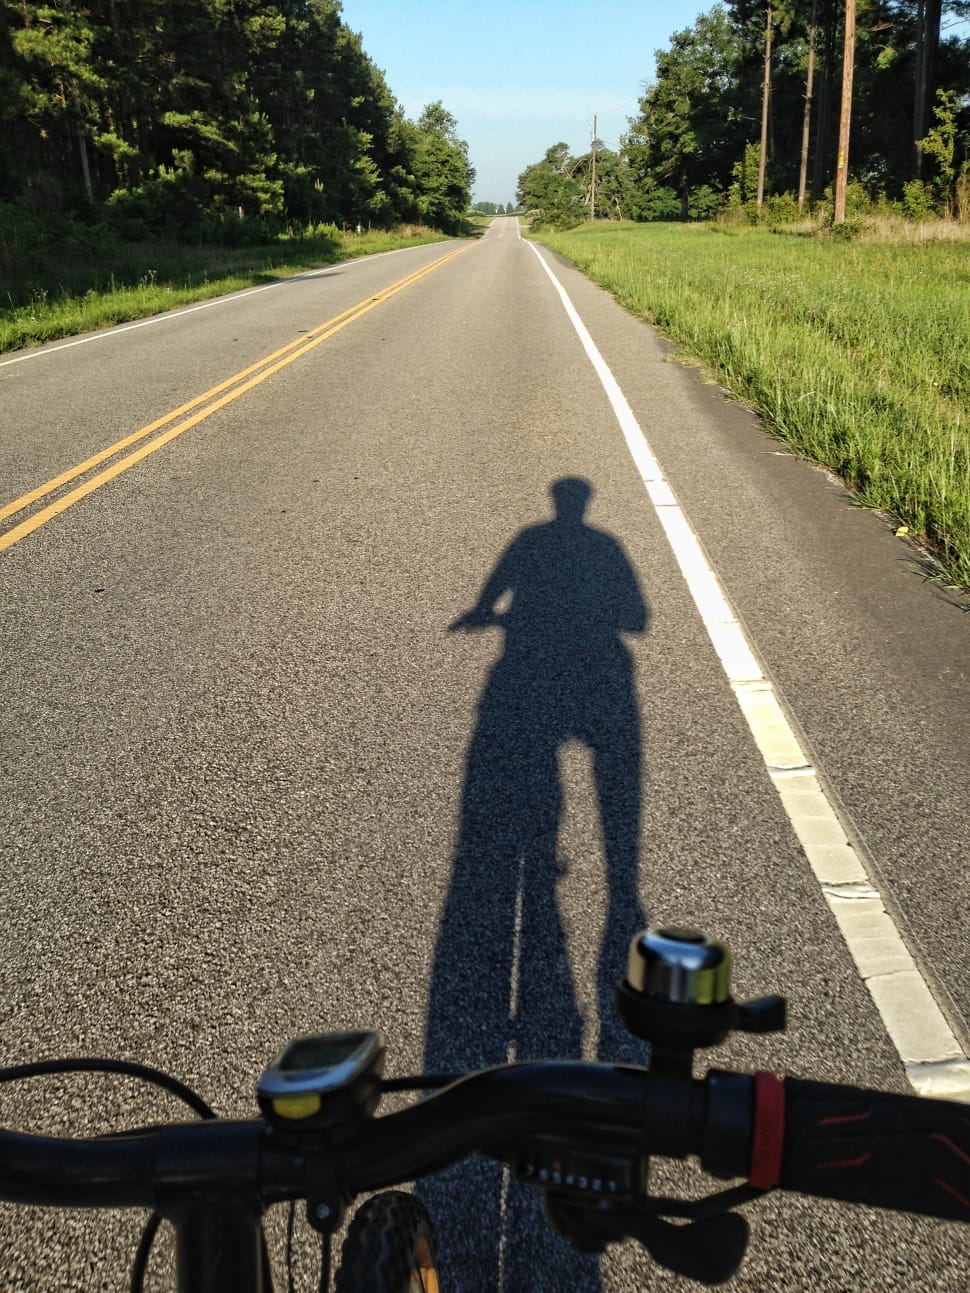 Shadow Of Cyclist, Cycling, Rural Road, road, shadow preview